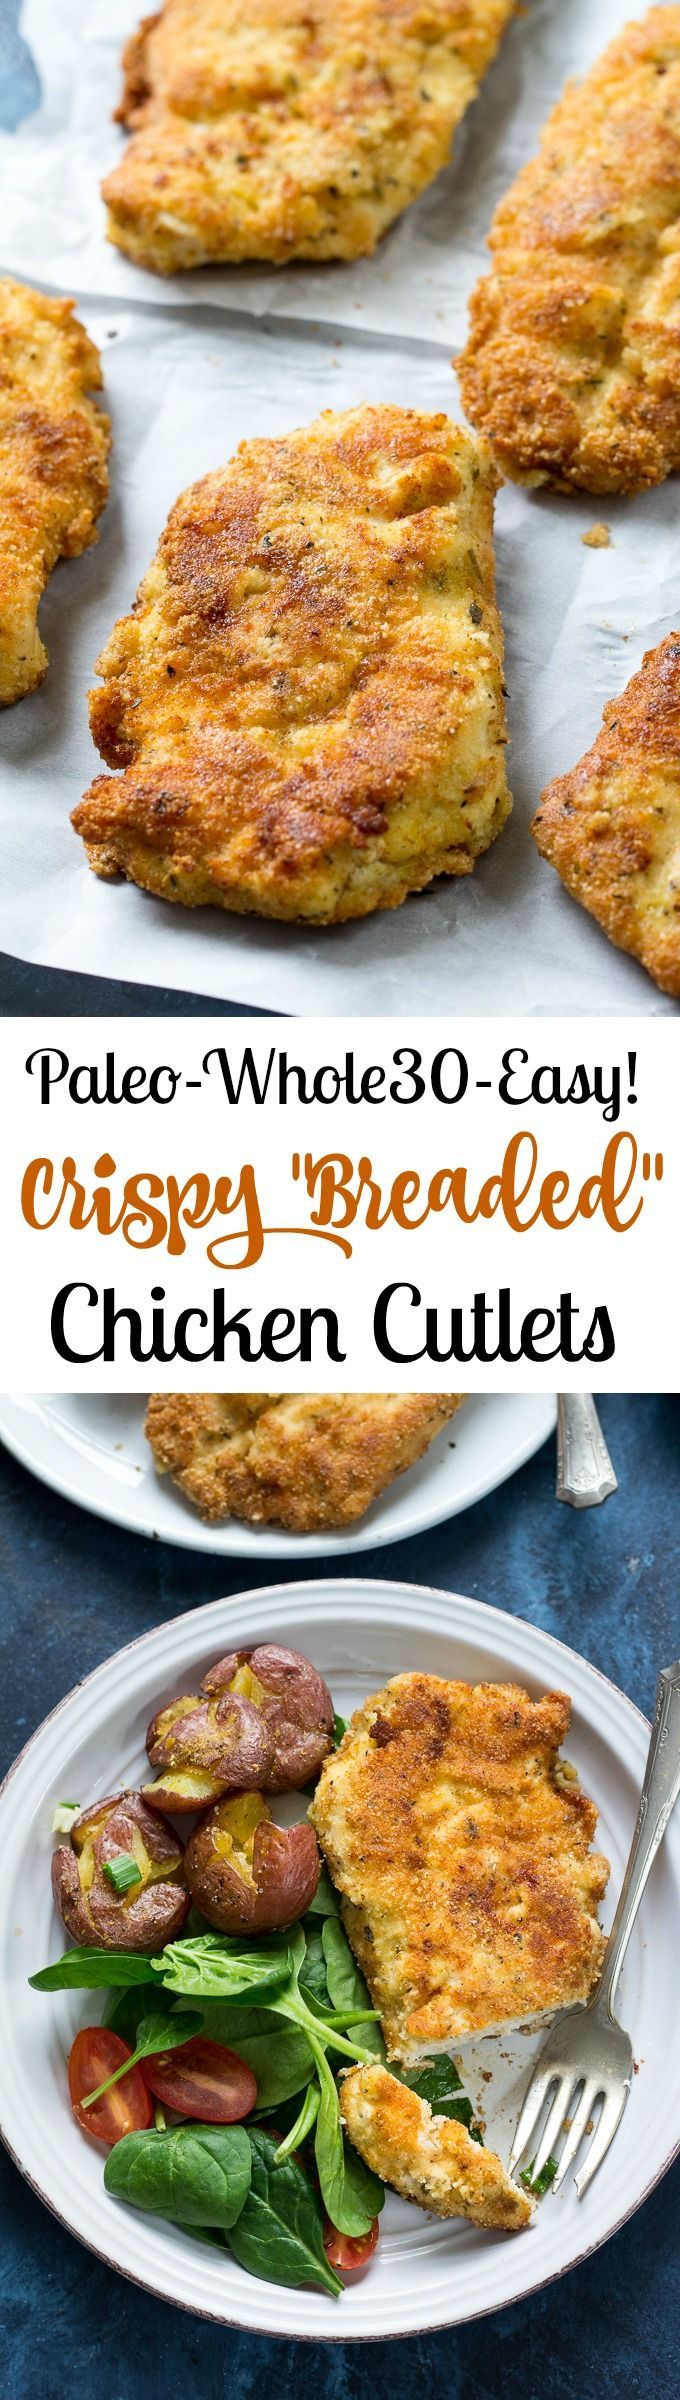 My familys favorite “breaded” Paleo Chicken Cutlets that are super easy, quick, and just as good as the original.  Whole30